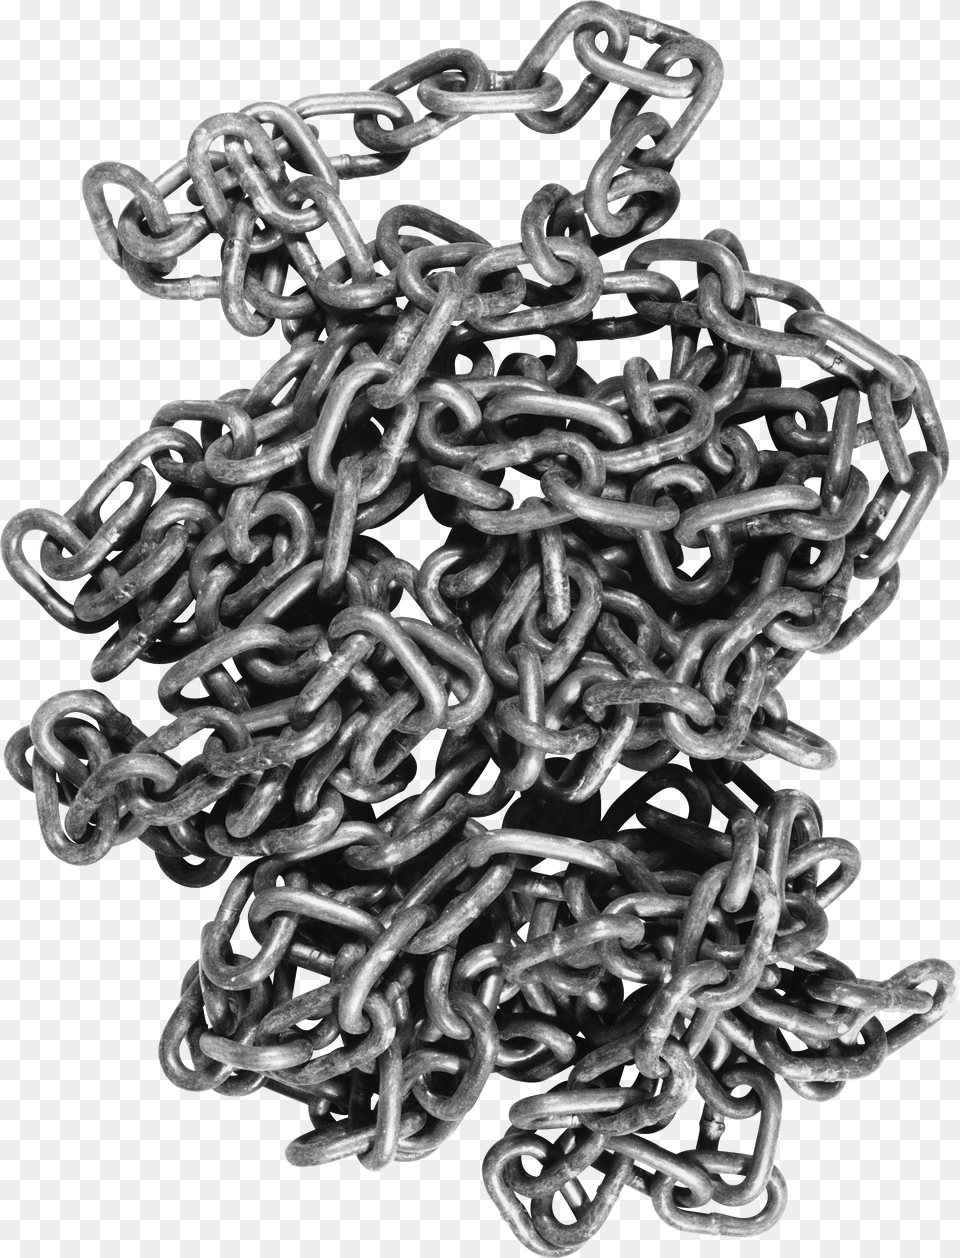 Chain, Chandelier, Lamp Free Png Download